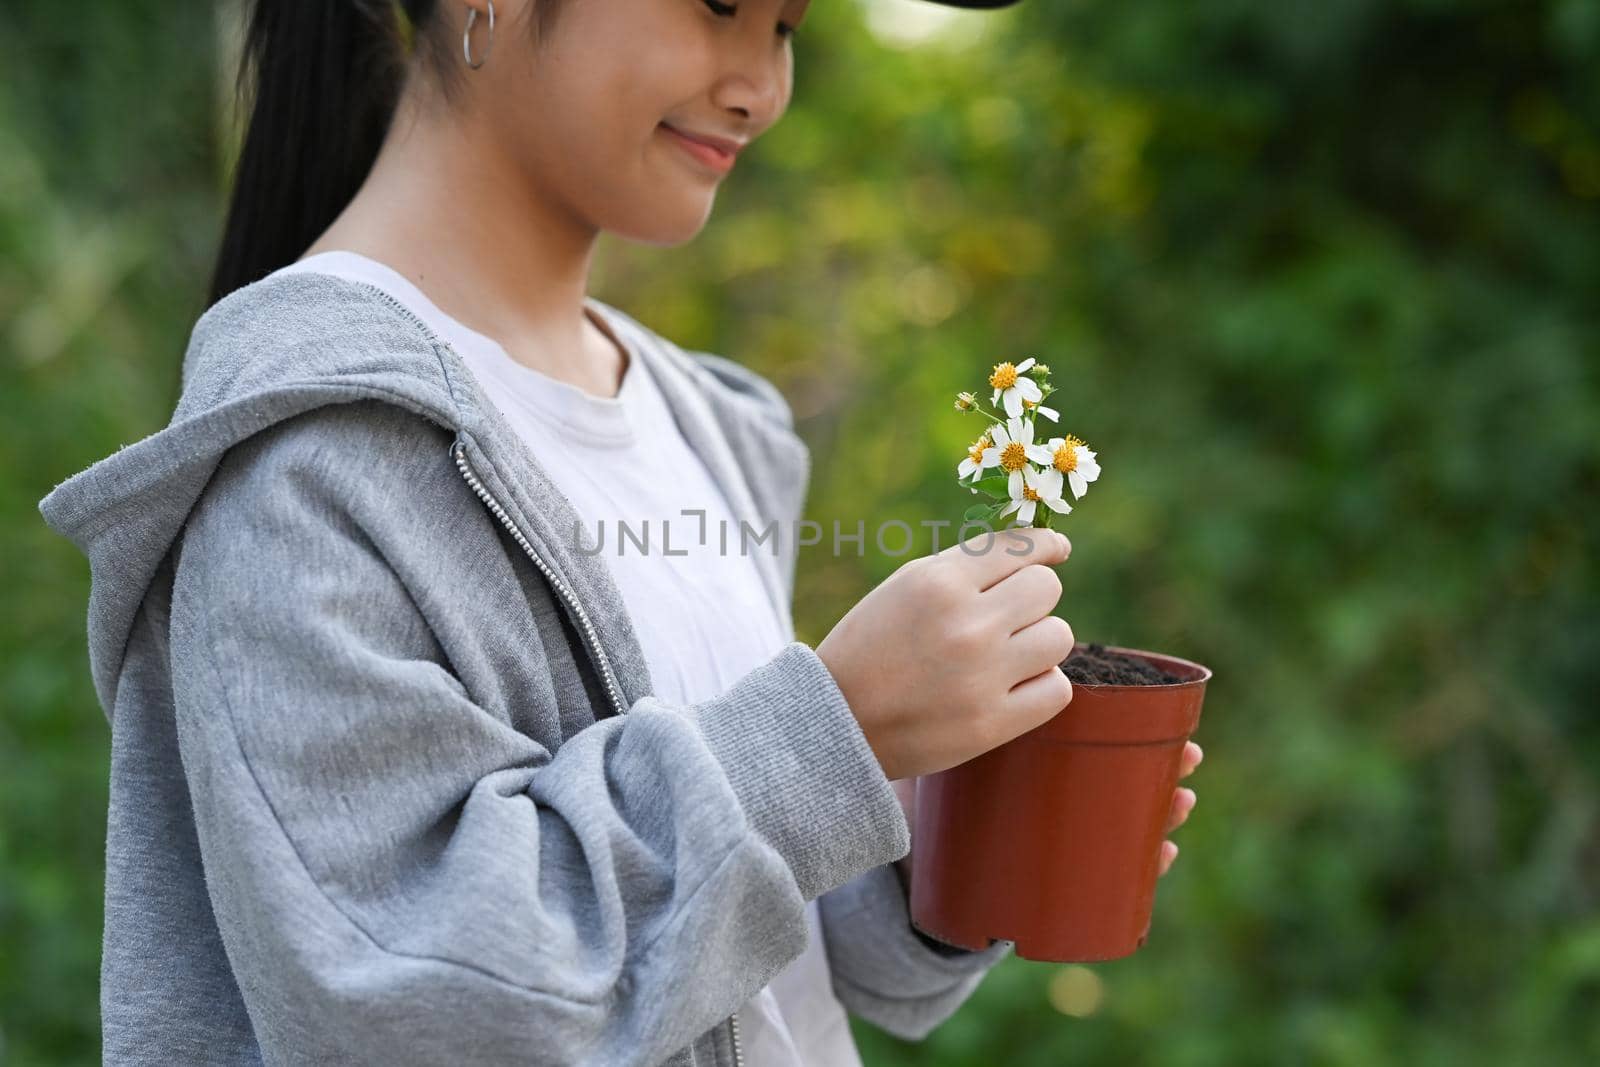 Cute asian girl holding potted plant in hands against blurred green nature background. Earth day, Ecology concept.